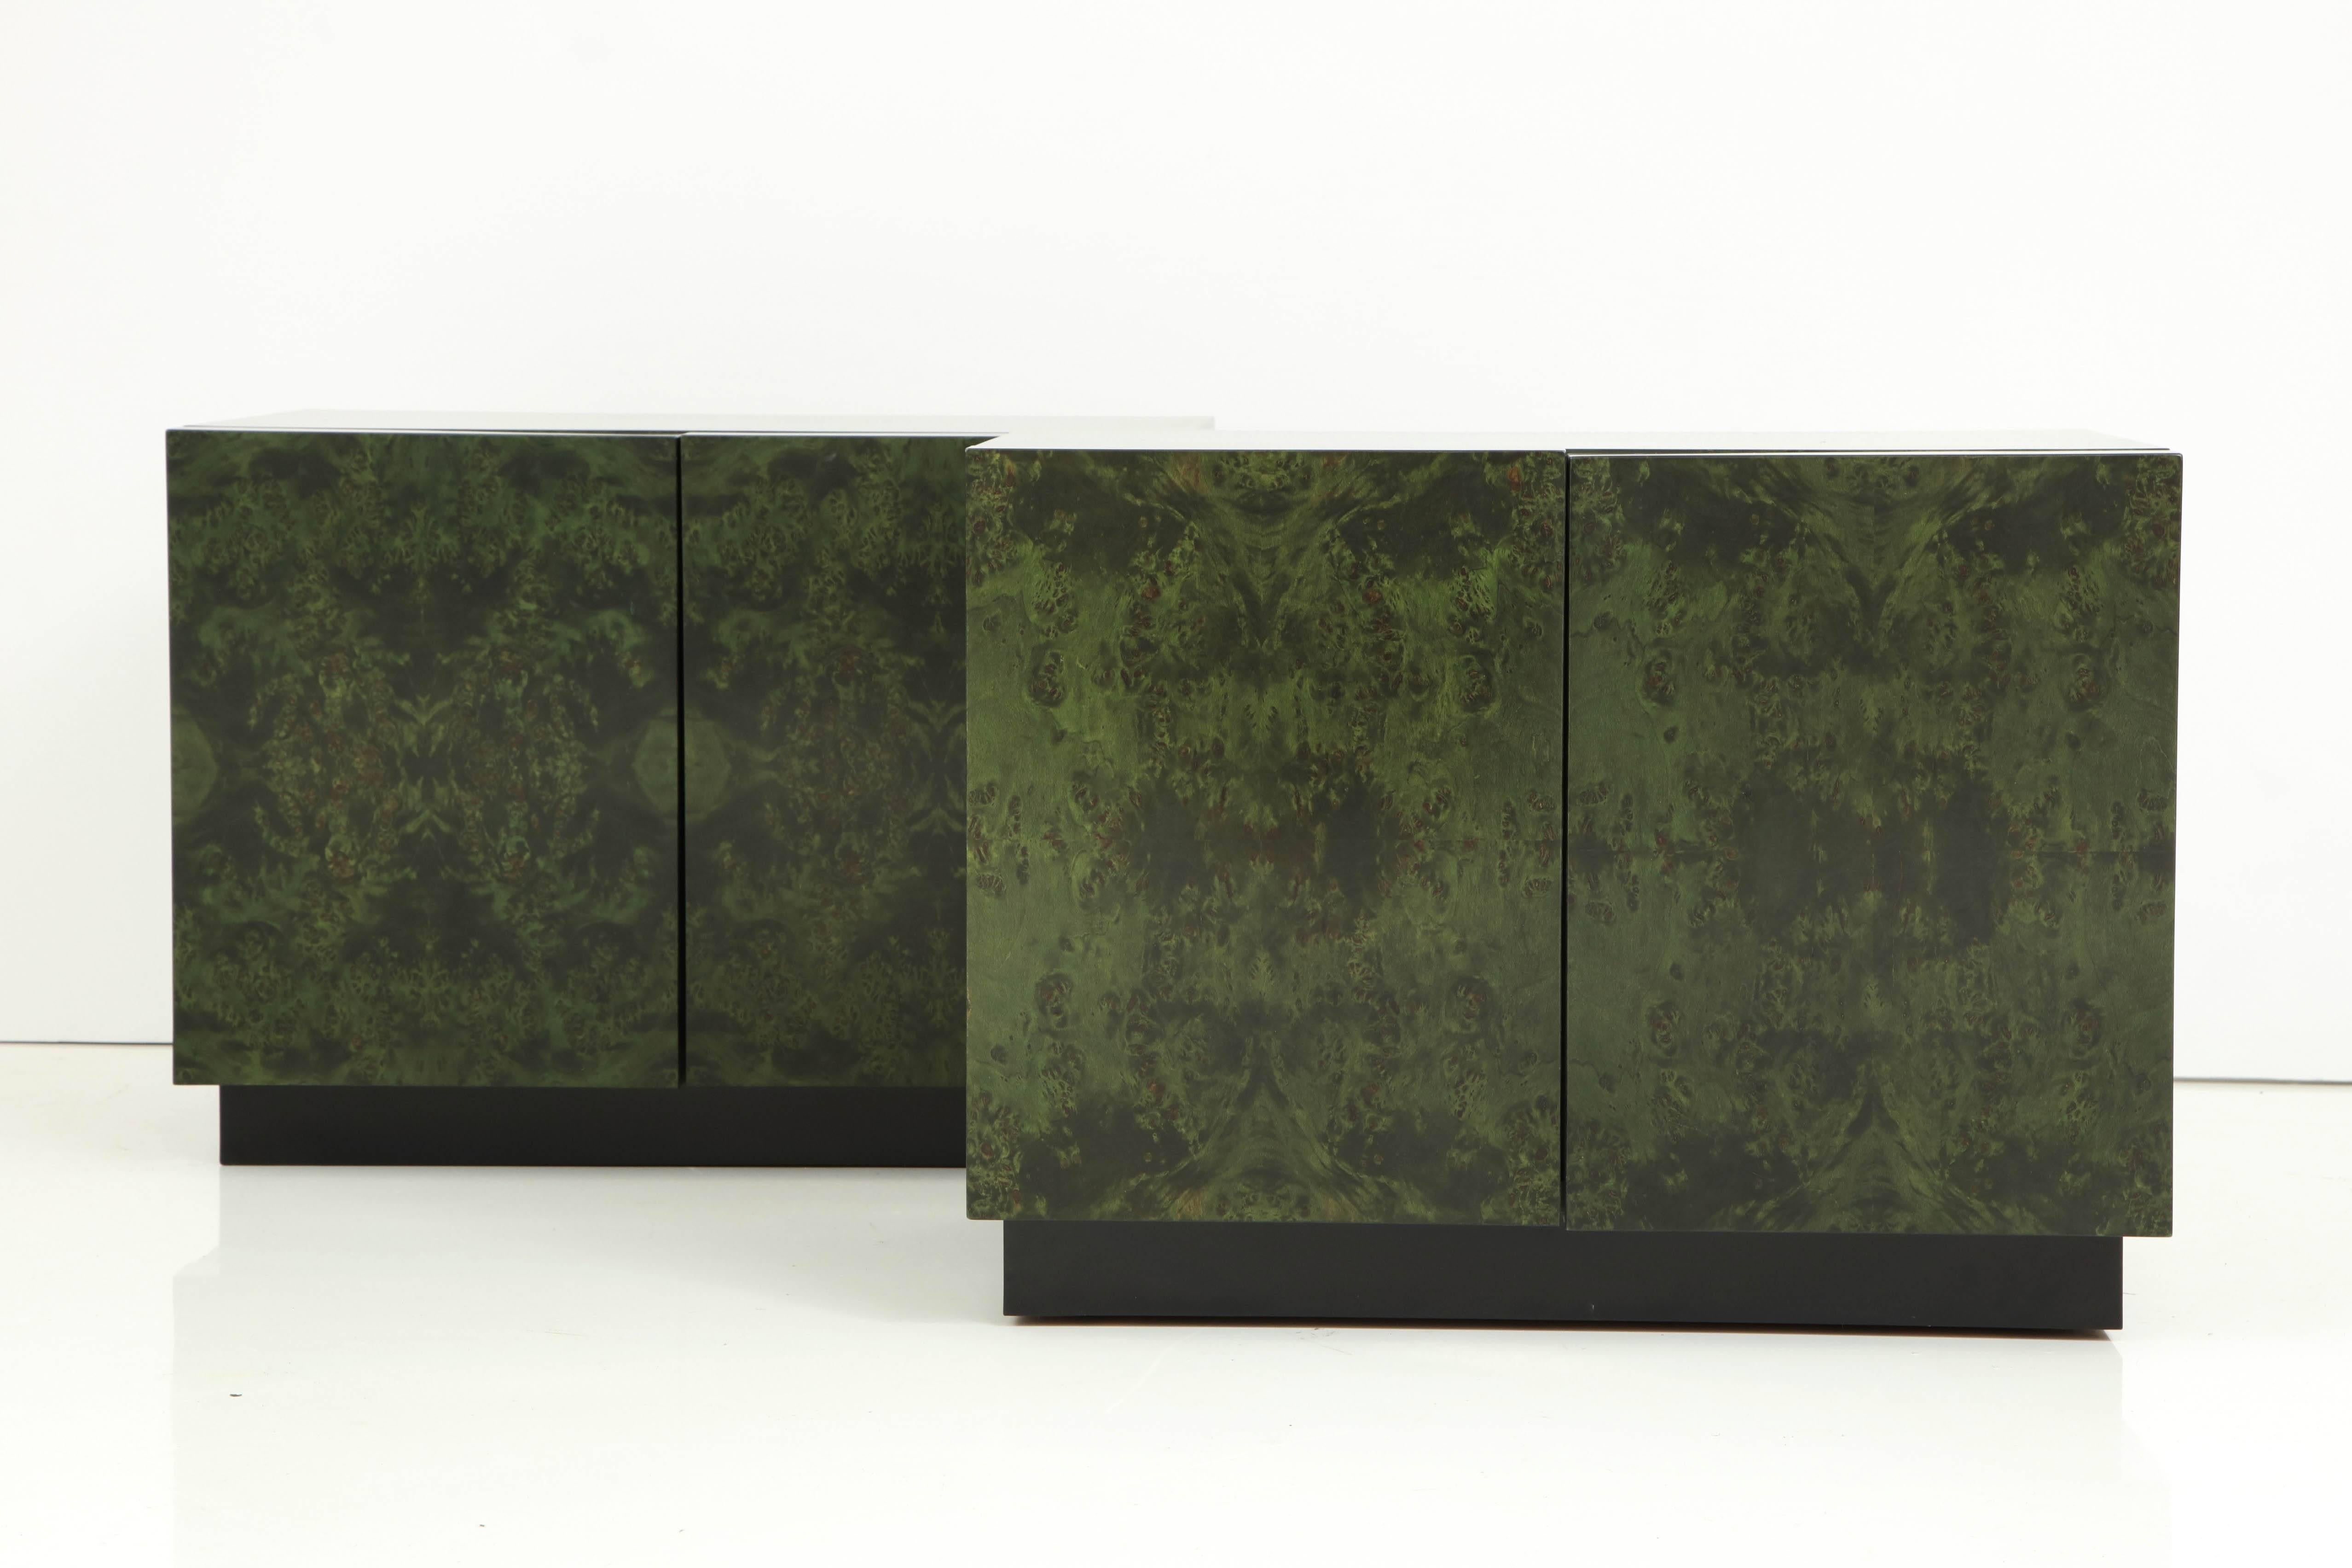 Pair of custom Emerald green aniline dyed burl walnut nightstands or side cabinets on matte black bases with two doors which conceals a shelf. Designed by Milo Baughman for Directional.